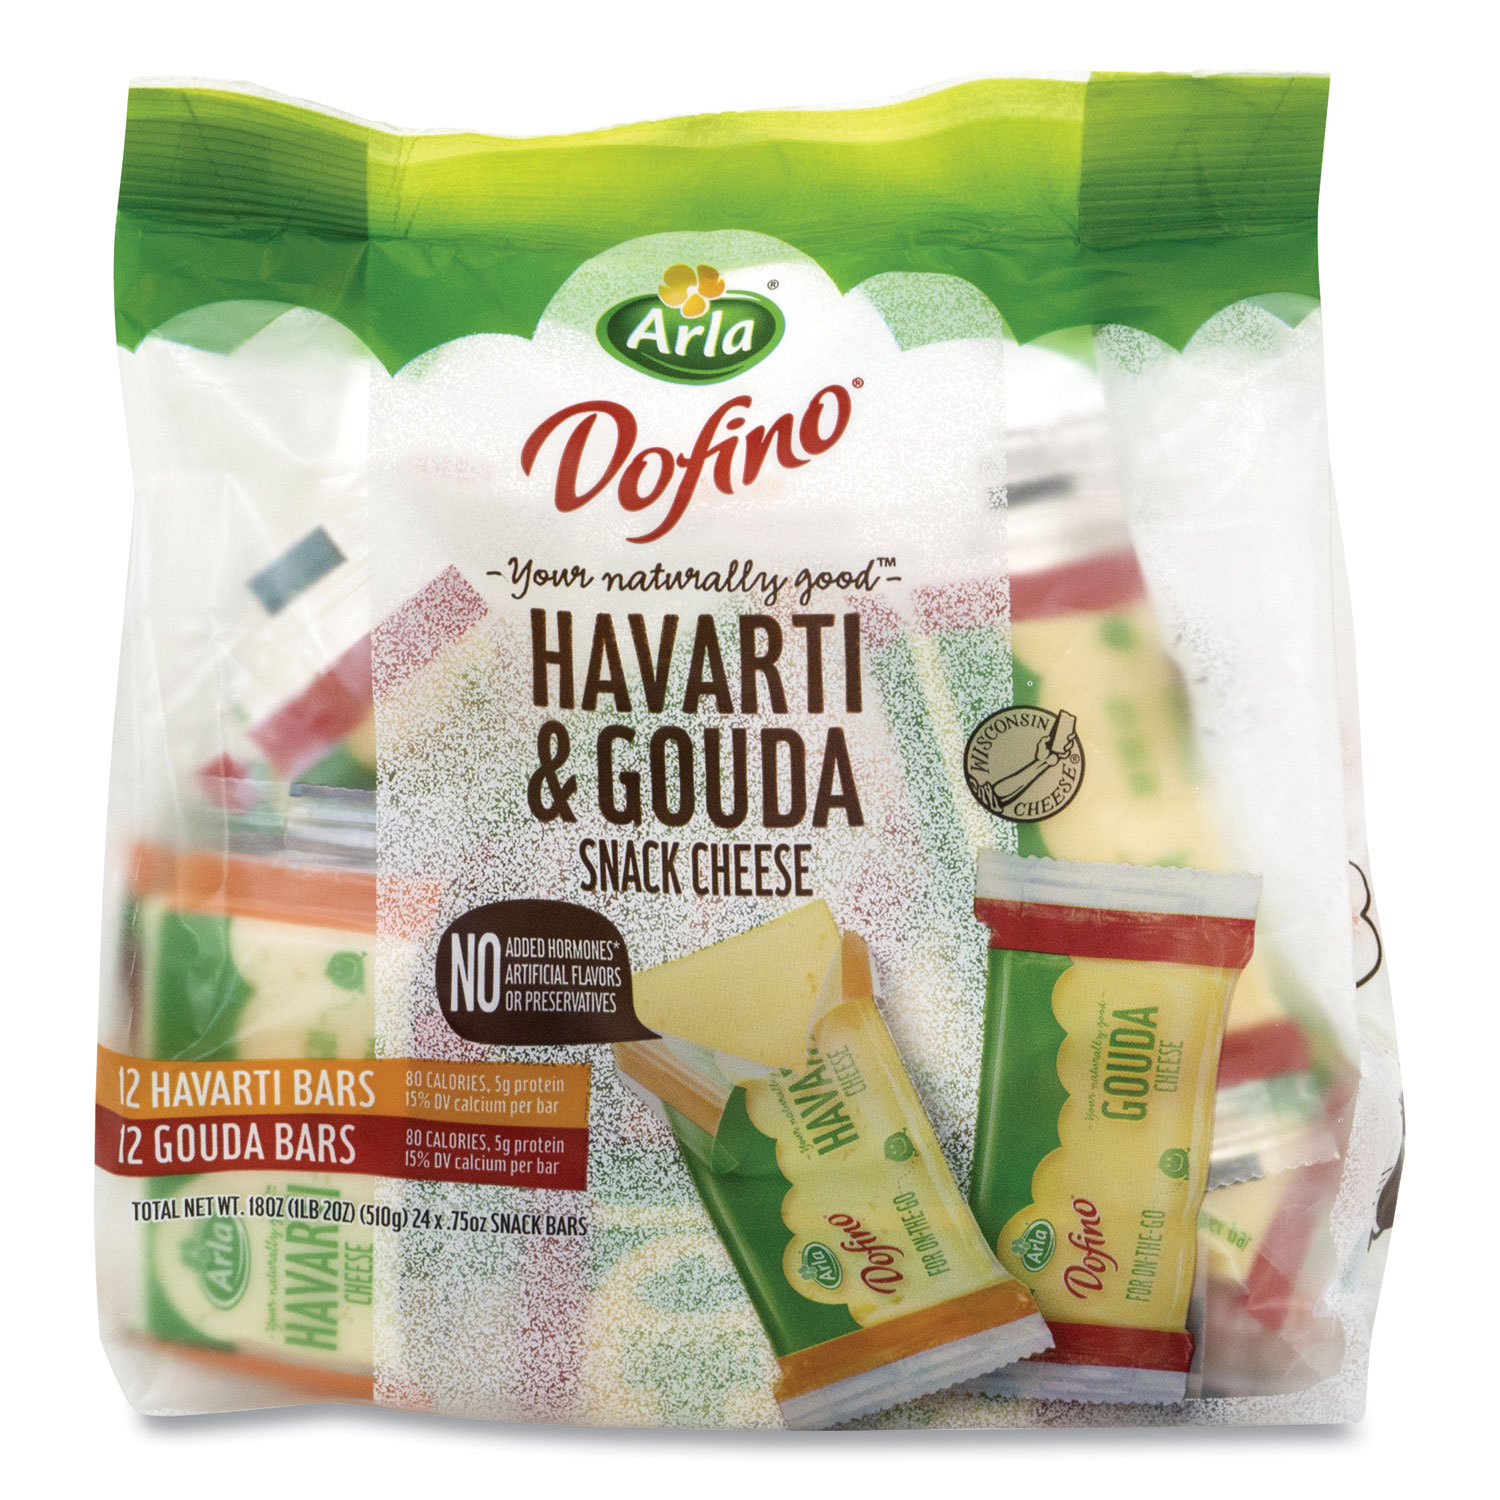 Arla® Havarti and Gouda Cheese Snack Bars, 0.75 oz Bars, 24 Bars/Pack, Free Delivery in 1-4 Business Days